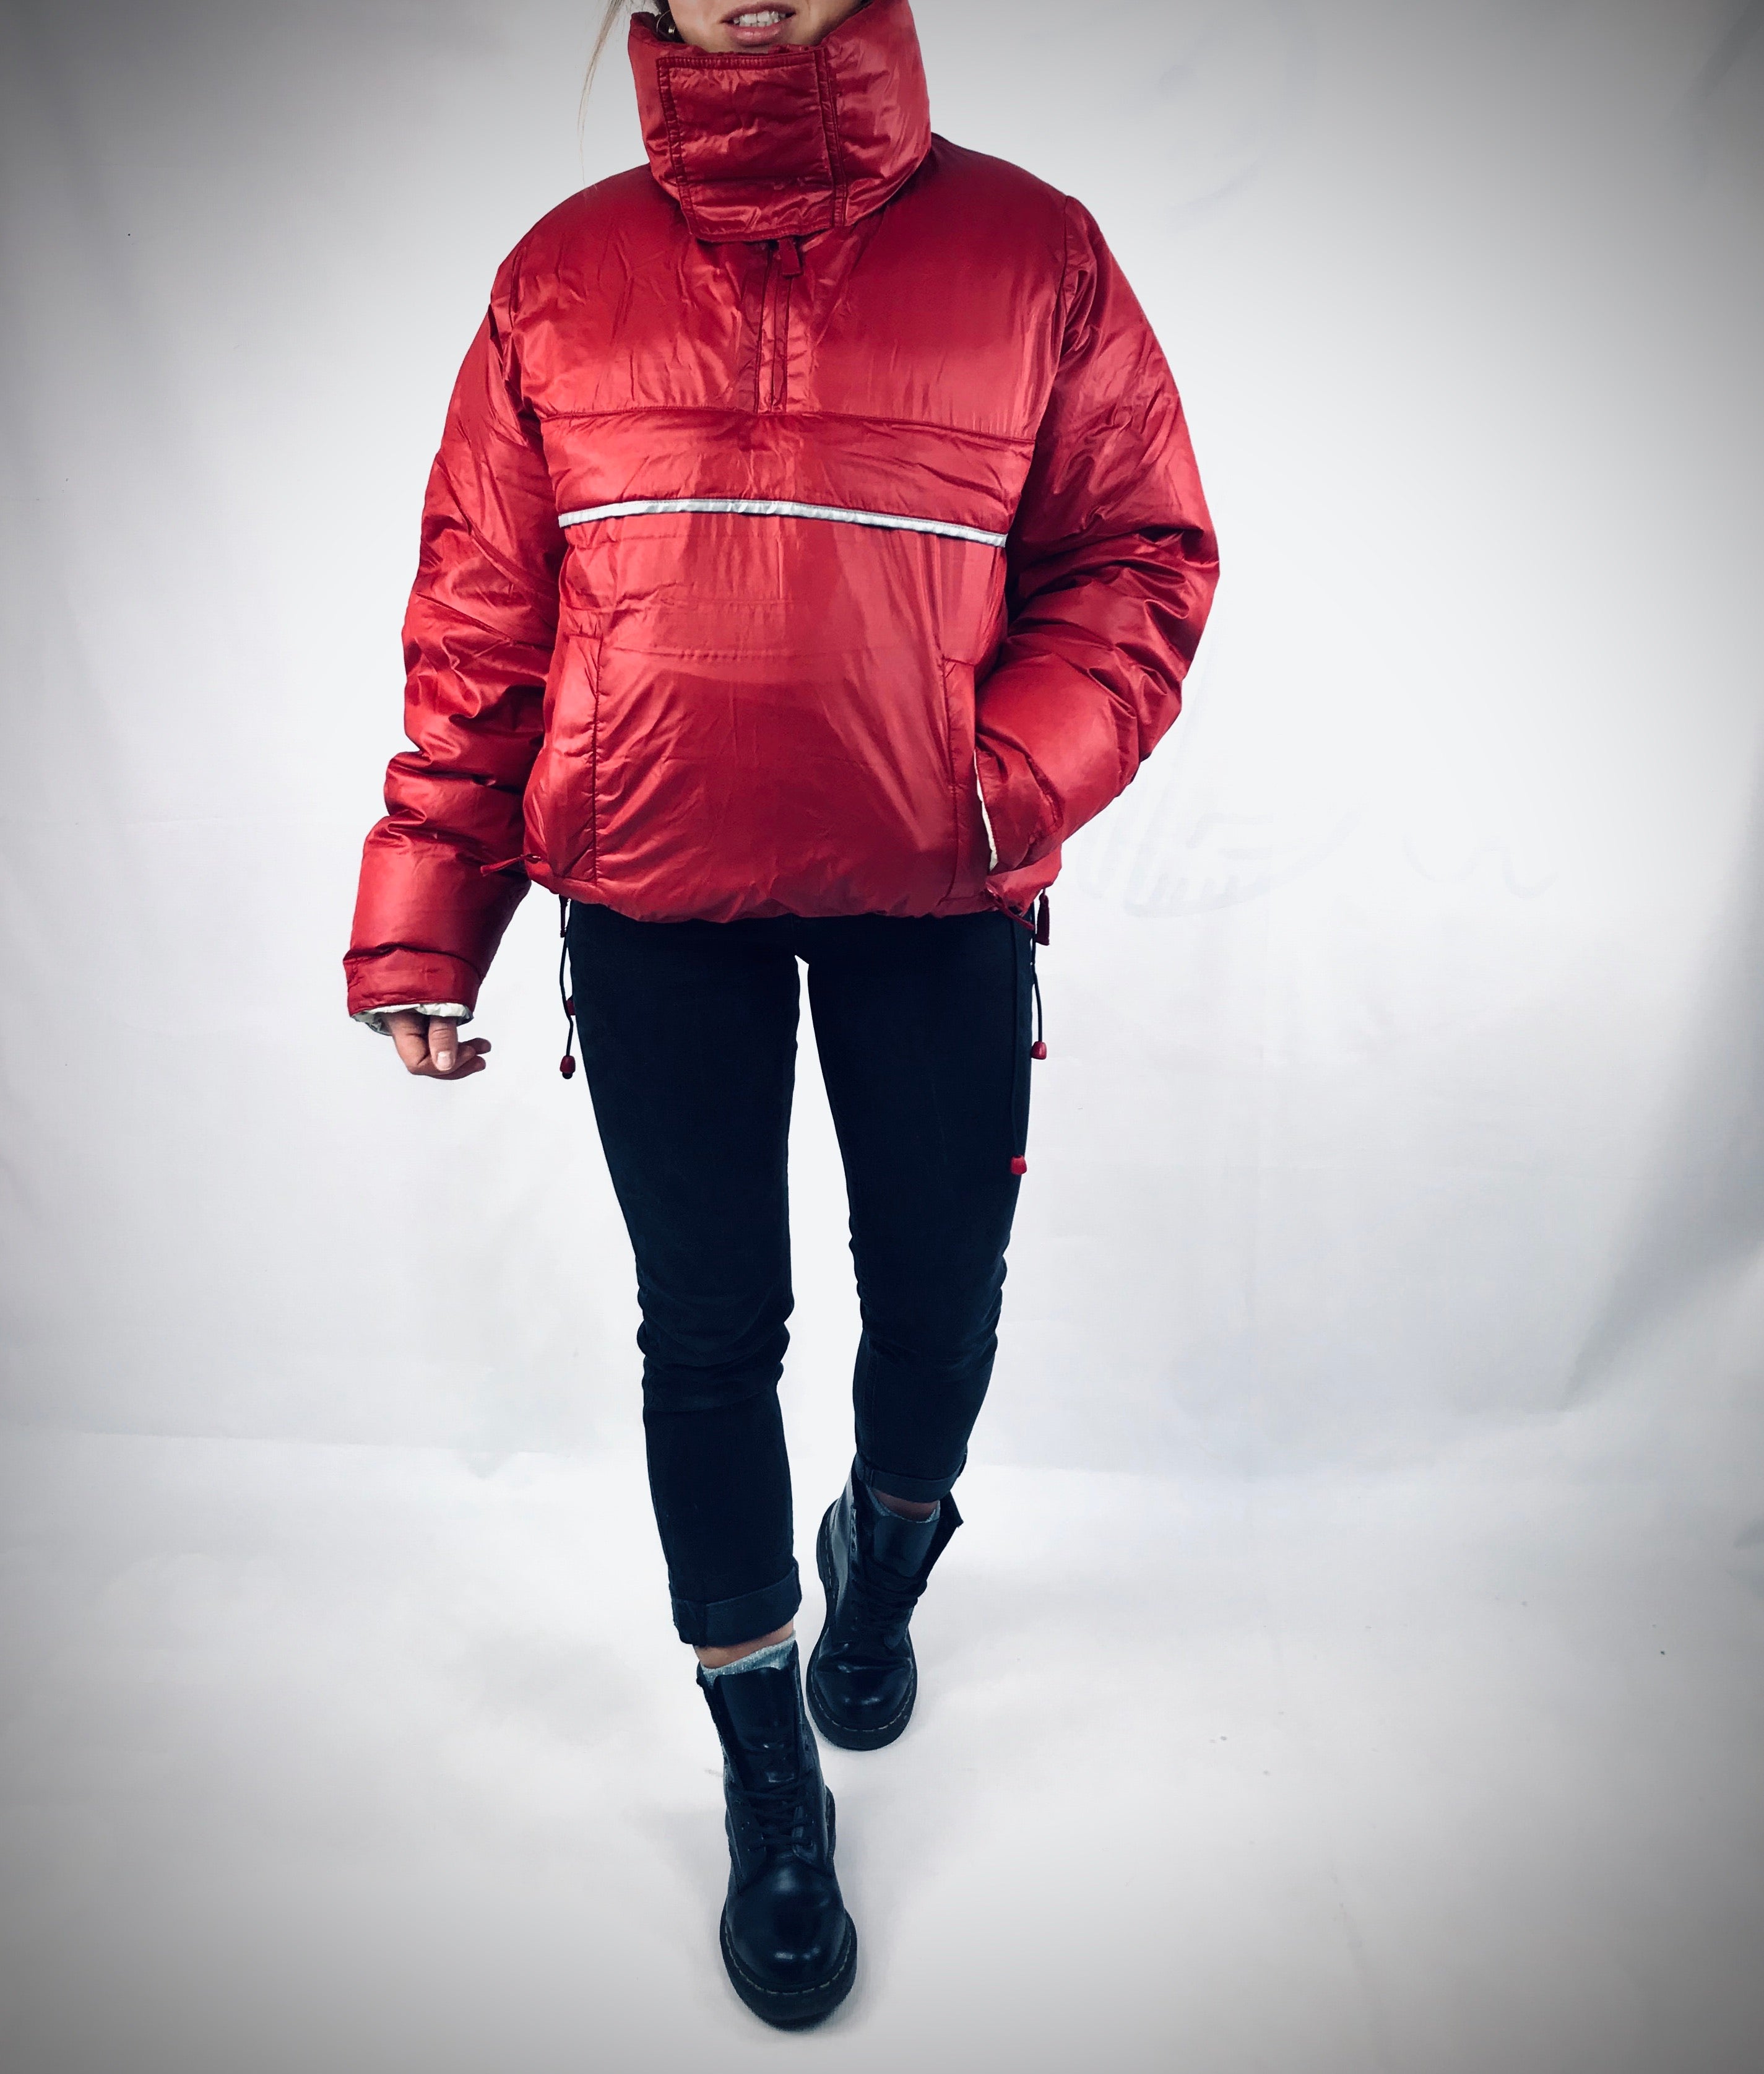 Cropped Sporty Puffer Down Pull Over Red Jacket SIZE L